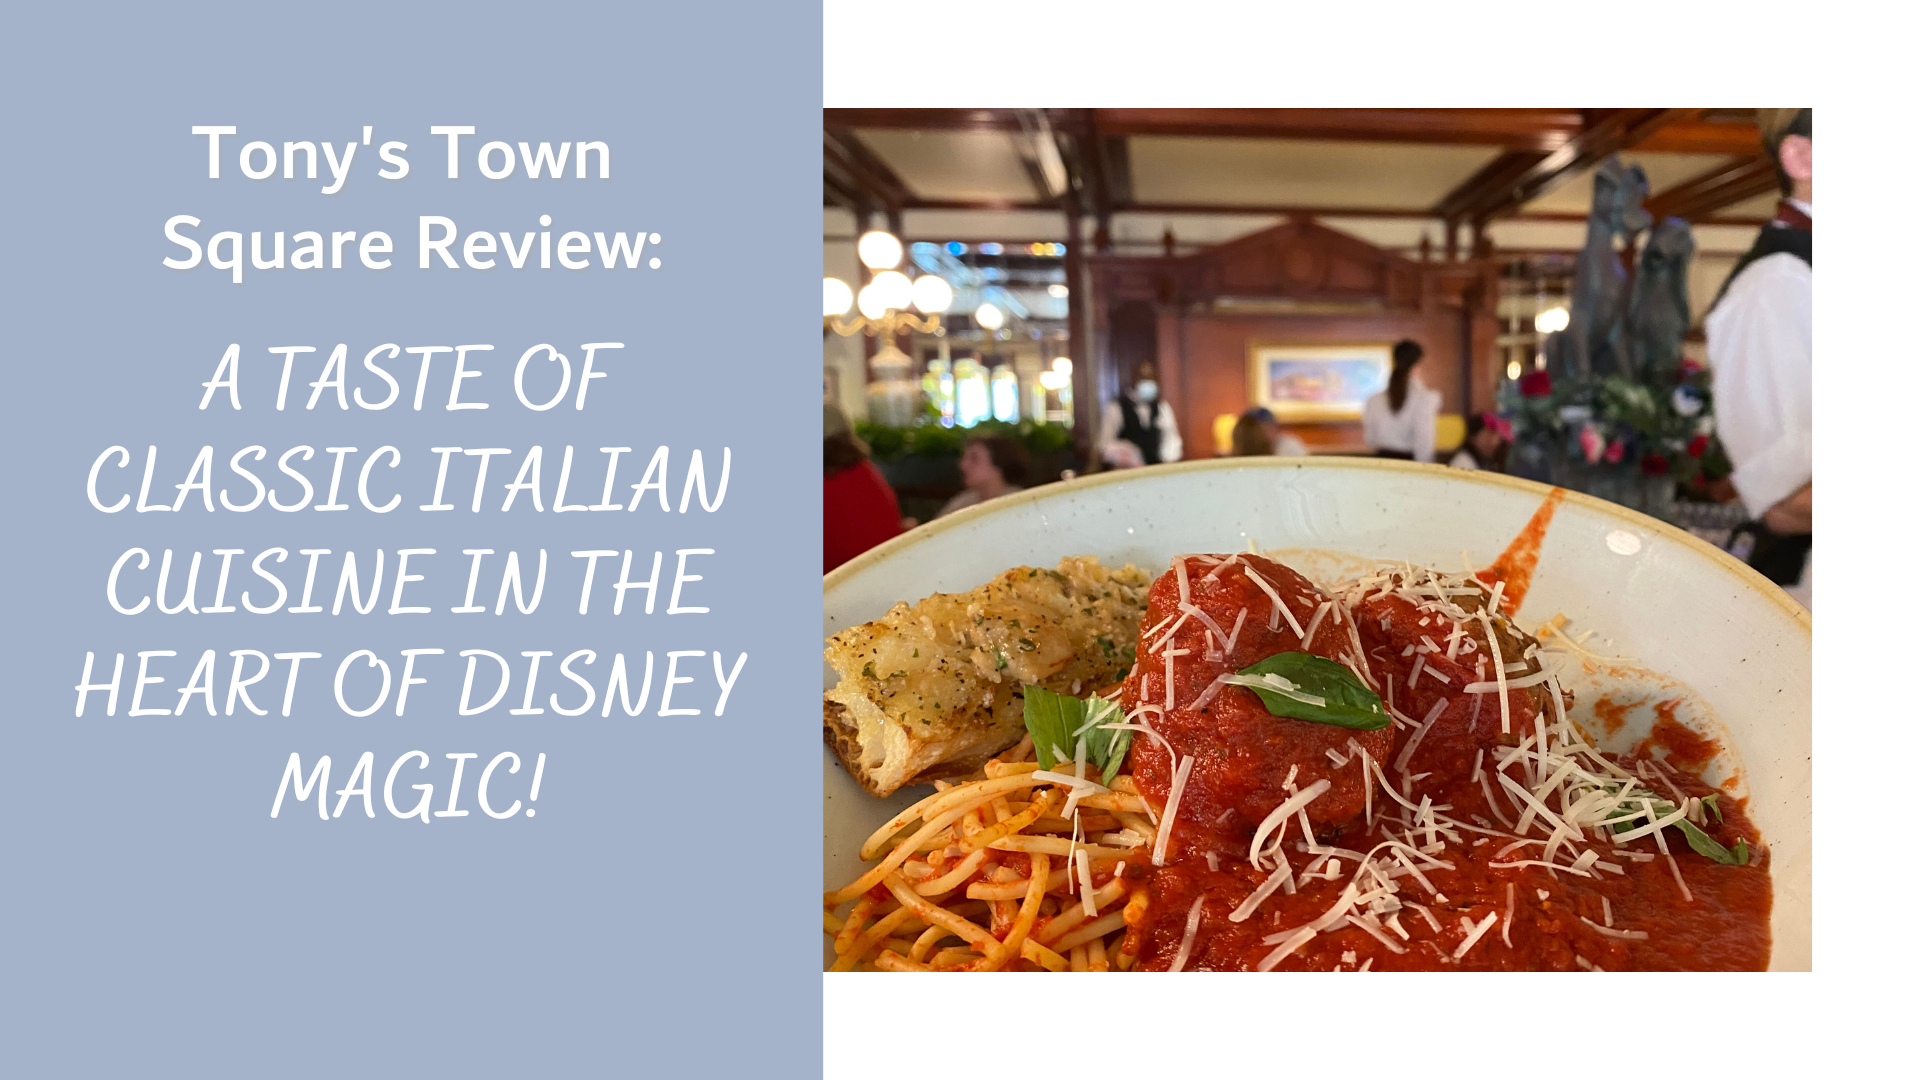 Tony's Town Square Review: A Taste of Classic Italian Cuisine in the Heart of Disney Magic